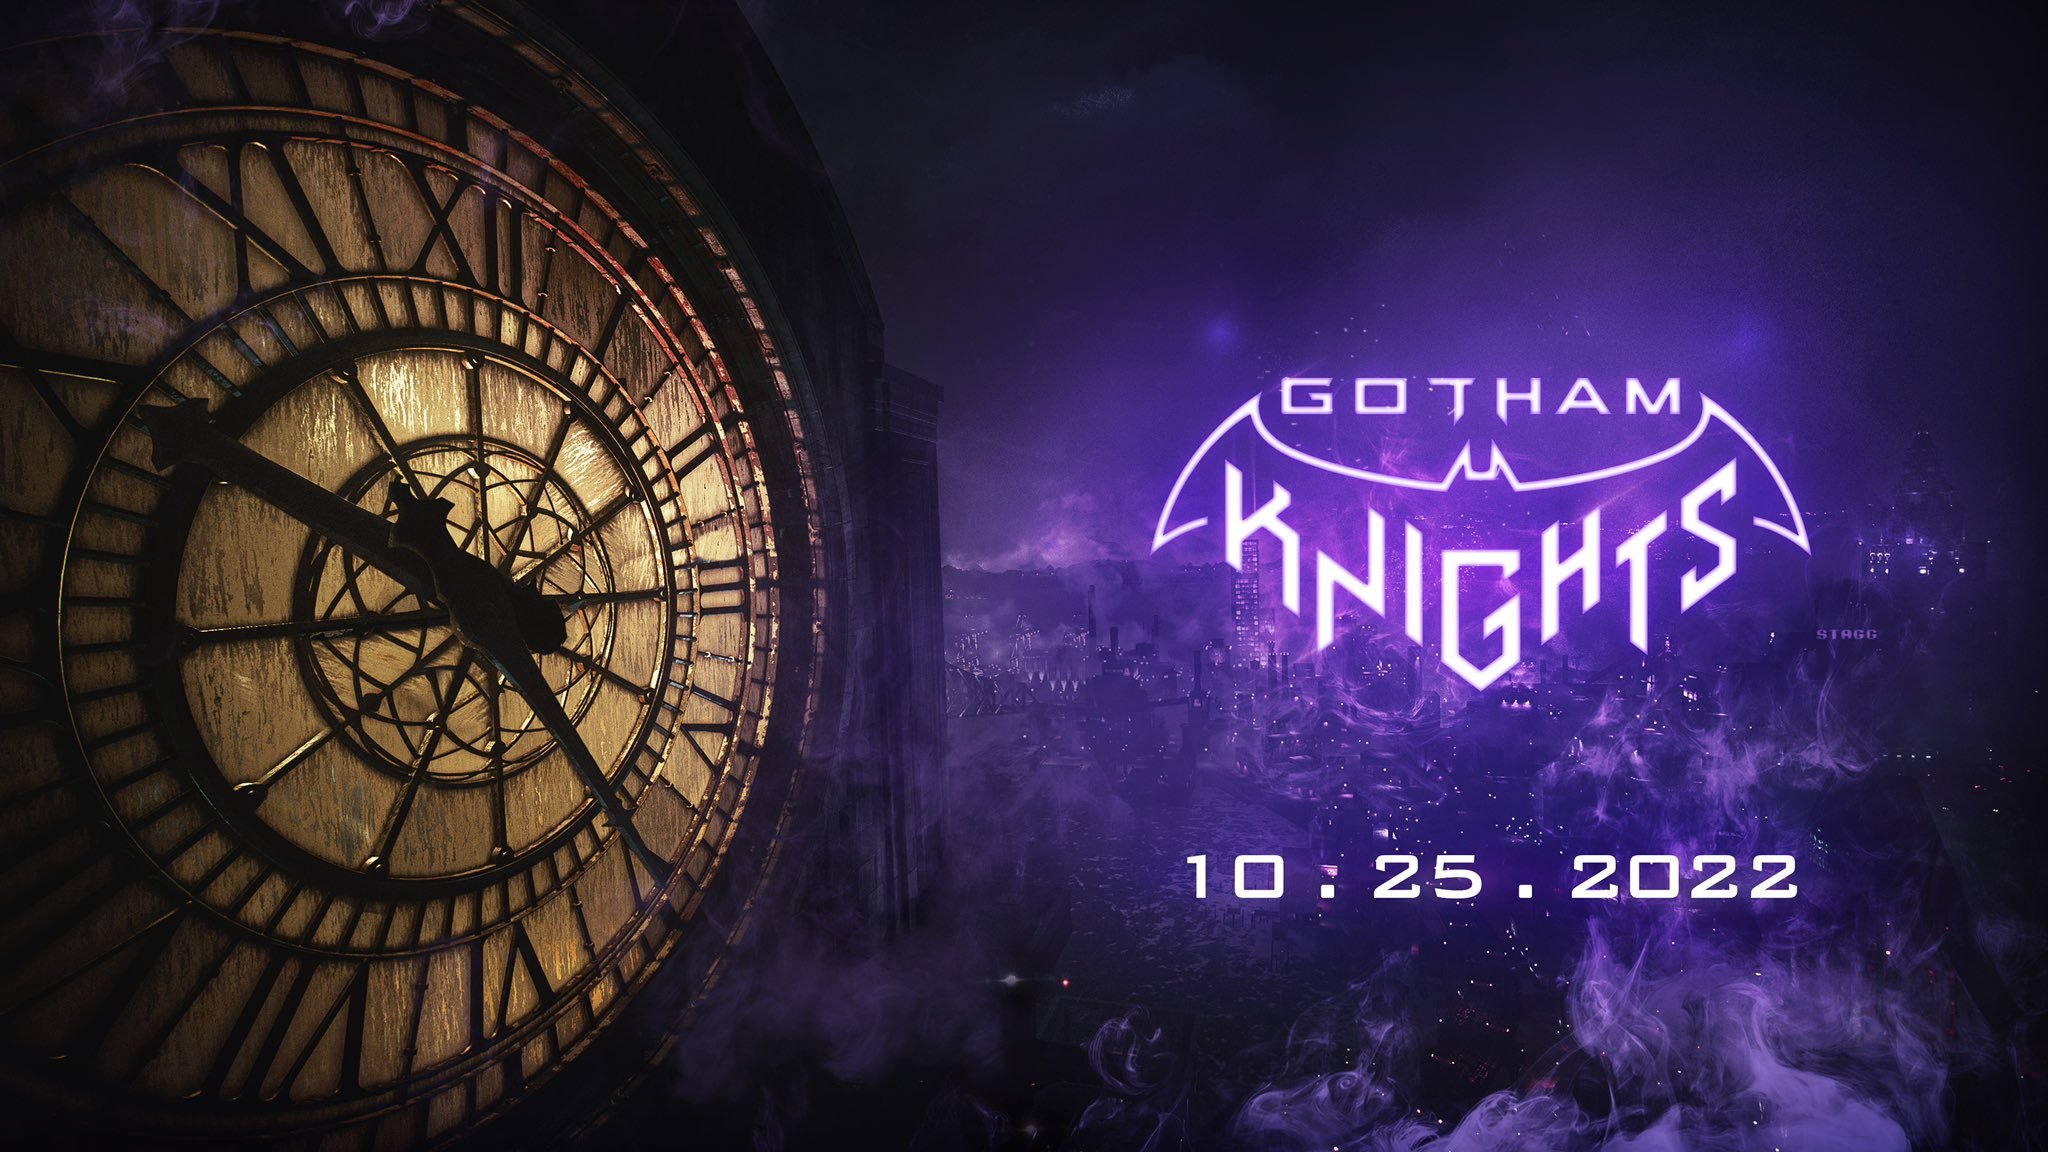 Gotham Knights' isn't coming to PS4 or Xbox One after all